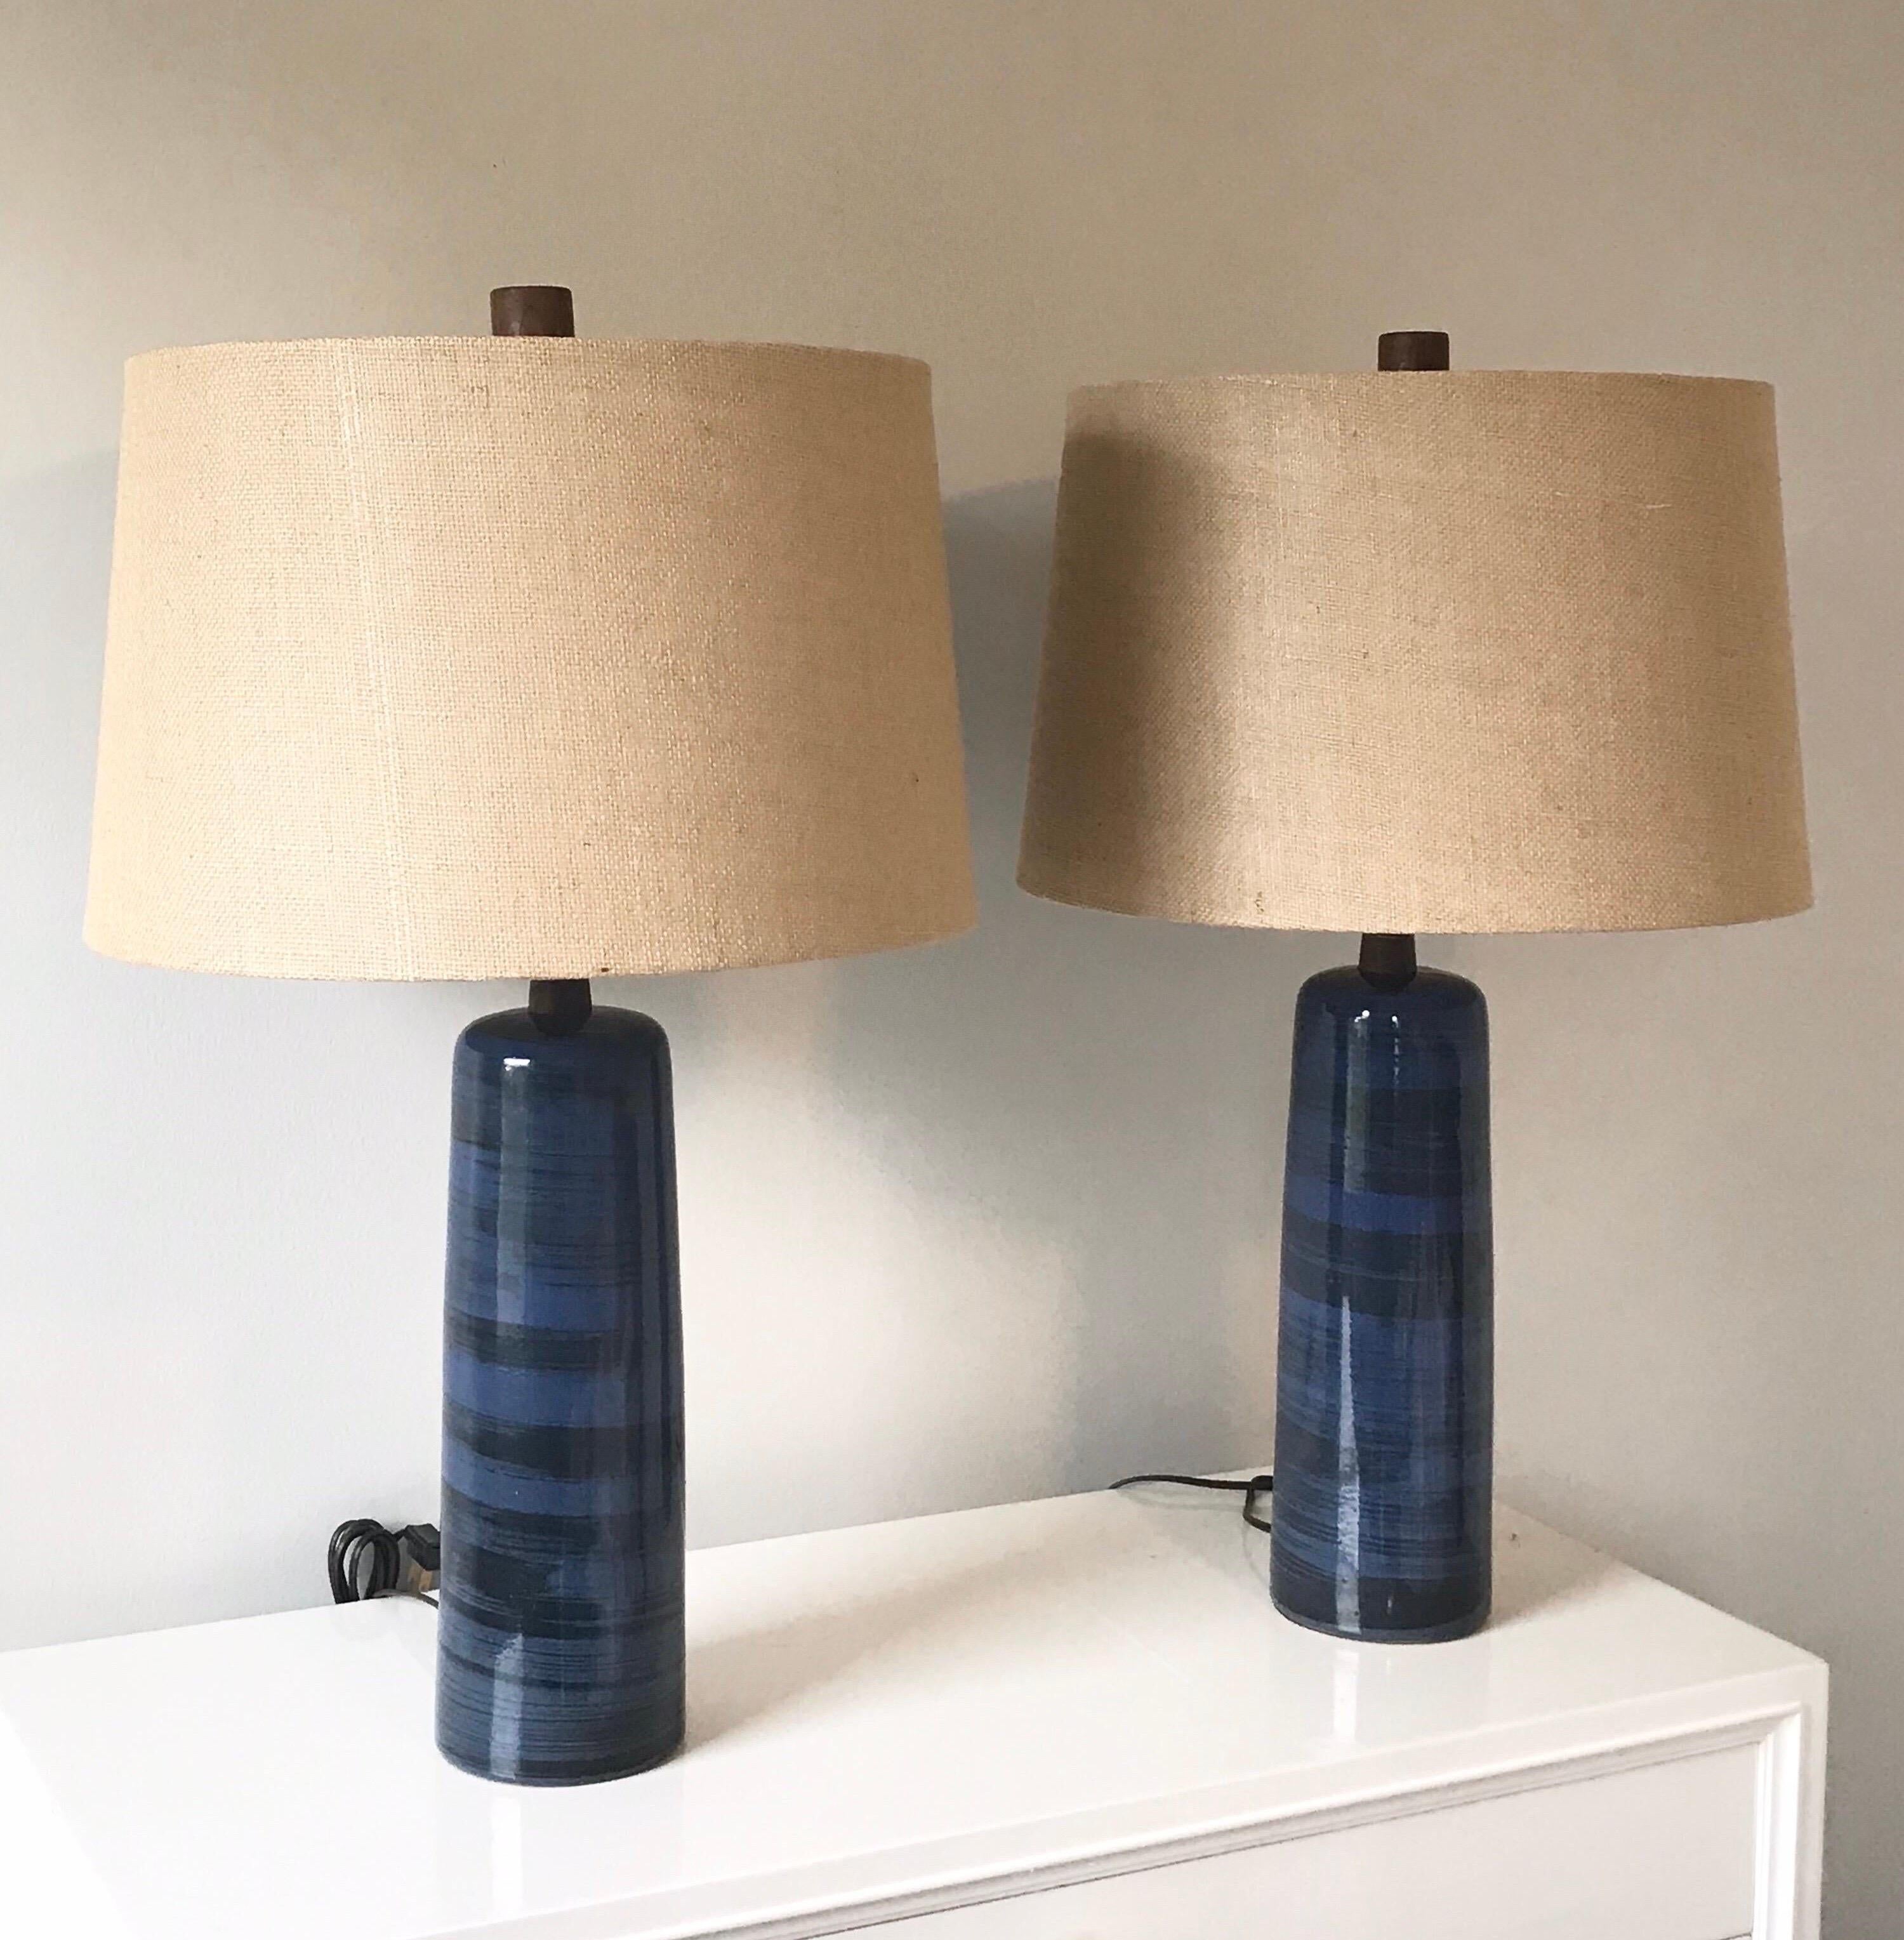 Stunning pair of lamps by Jane and Gordon Martz. Lamps feature a tall ceramic base in dark blue and black stripes/ swirls, a walnut neck, and complimented with a walnut finial. Lamps have new shades and wiring appears updated at some point with a